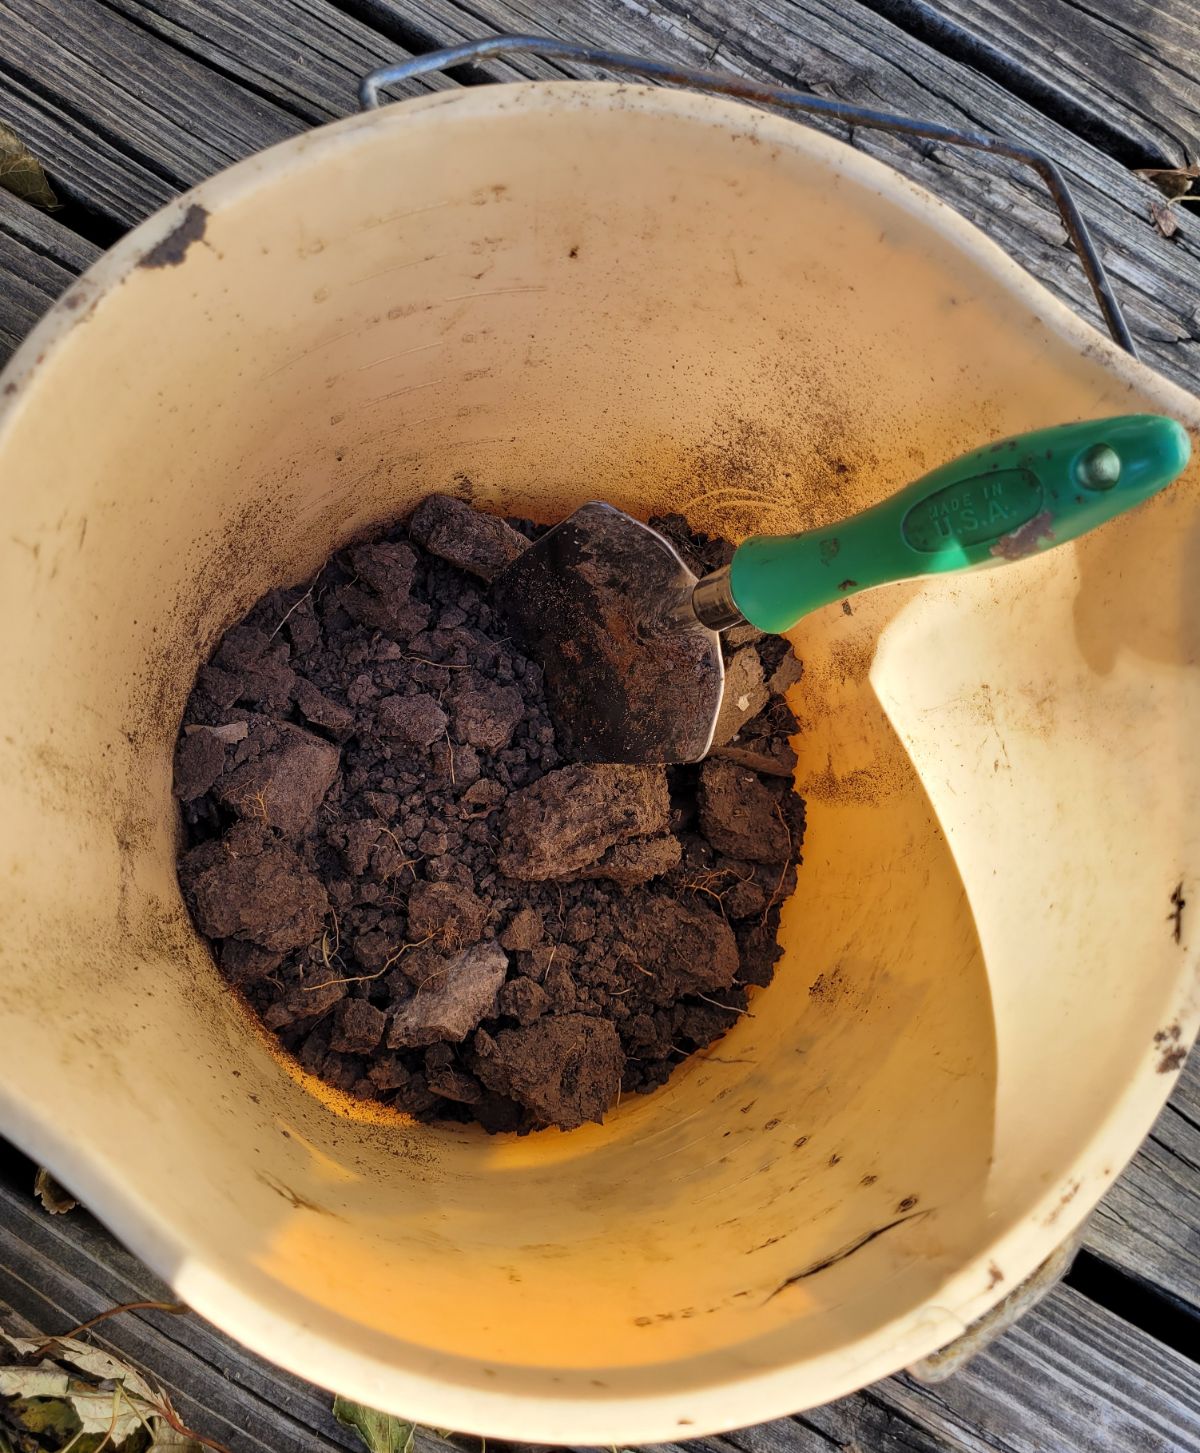 Soil samples mixed in a bucket